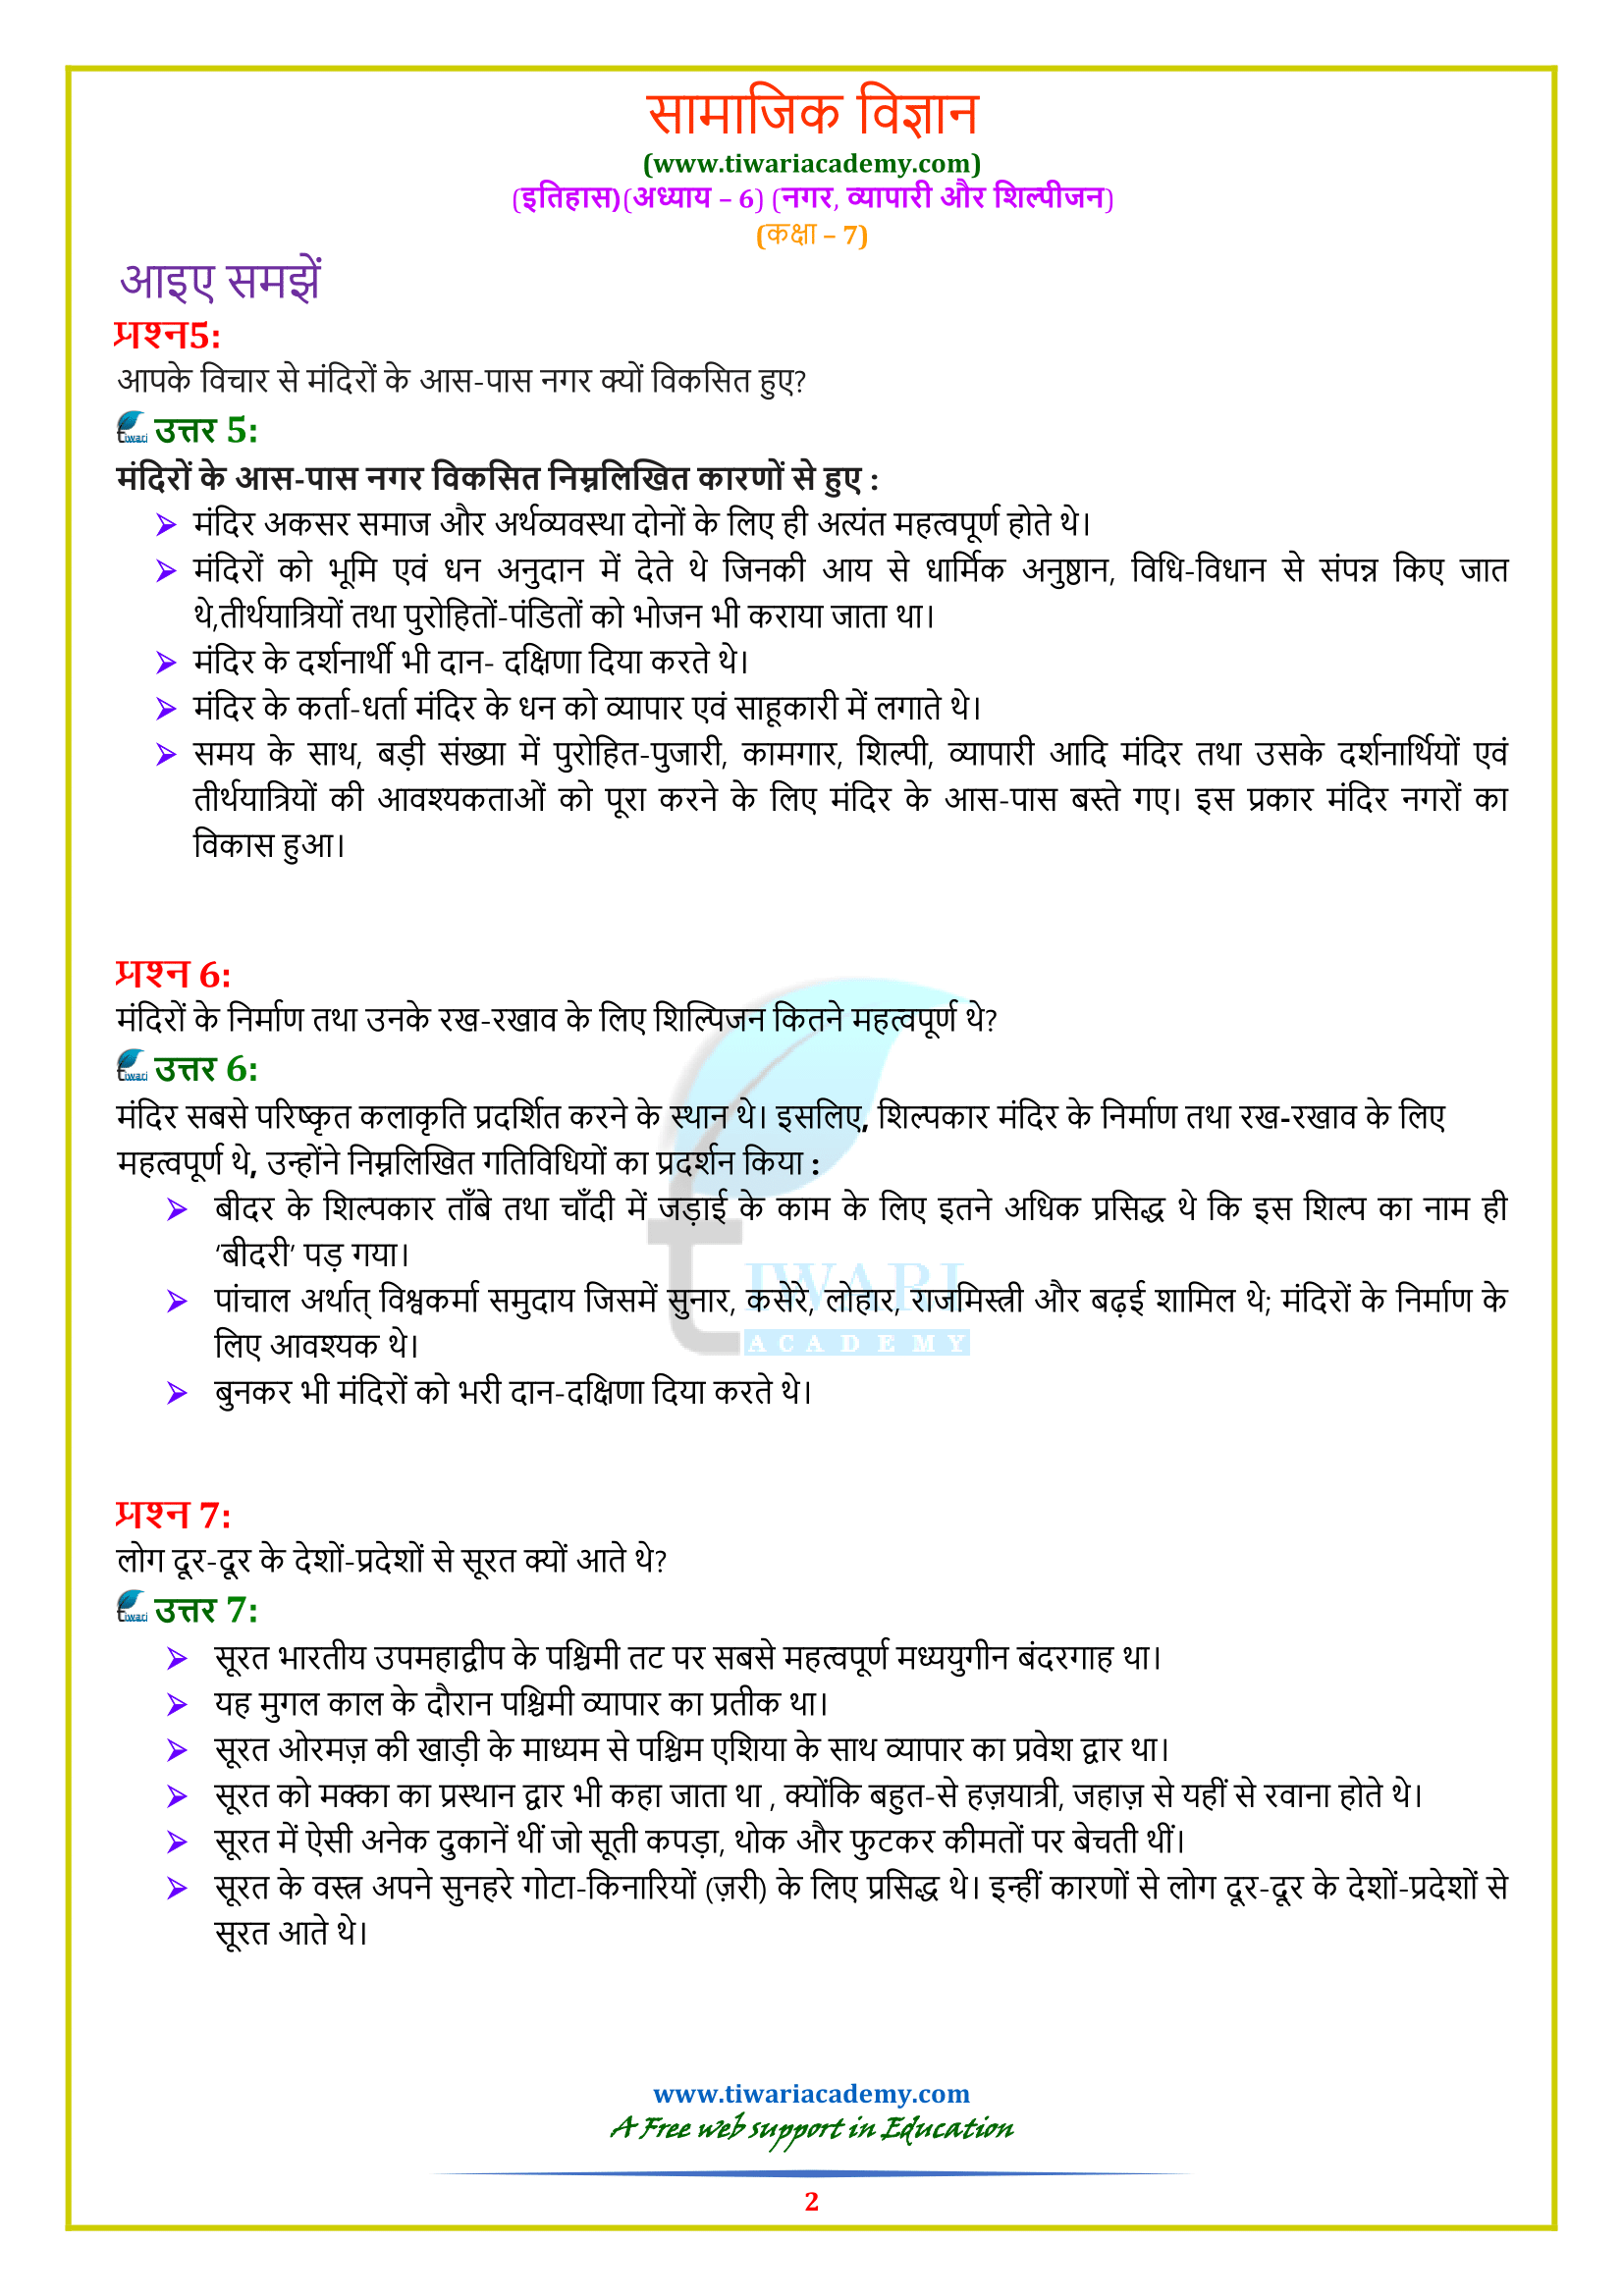 NCERT Solutions for Class 7 History chapter 6 in Hindi Medium